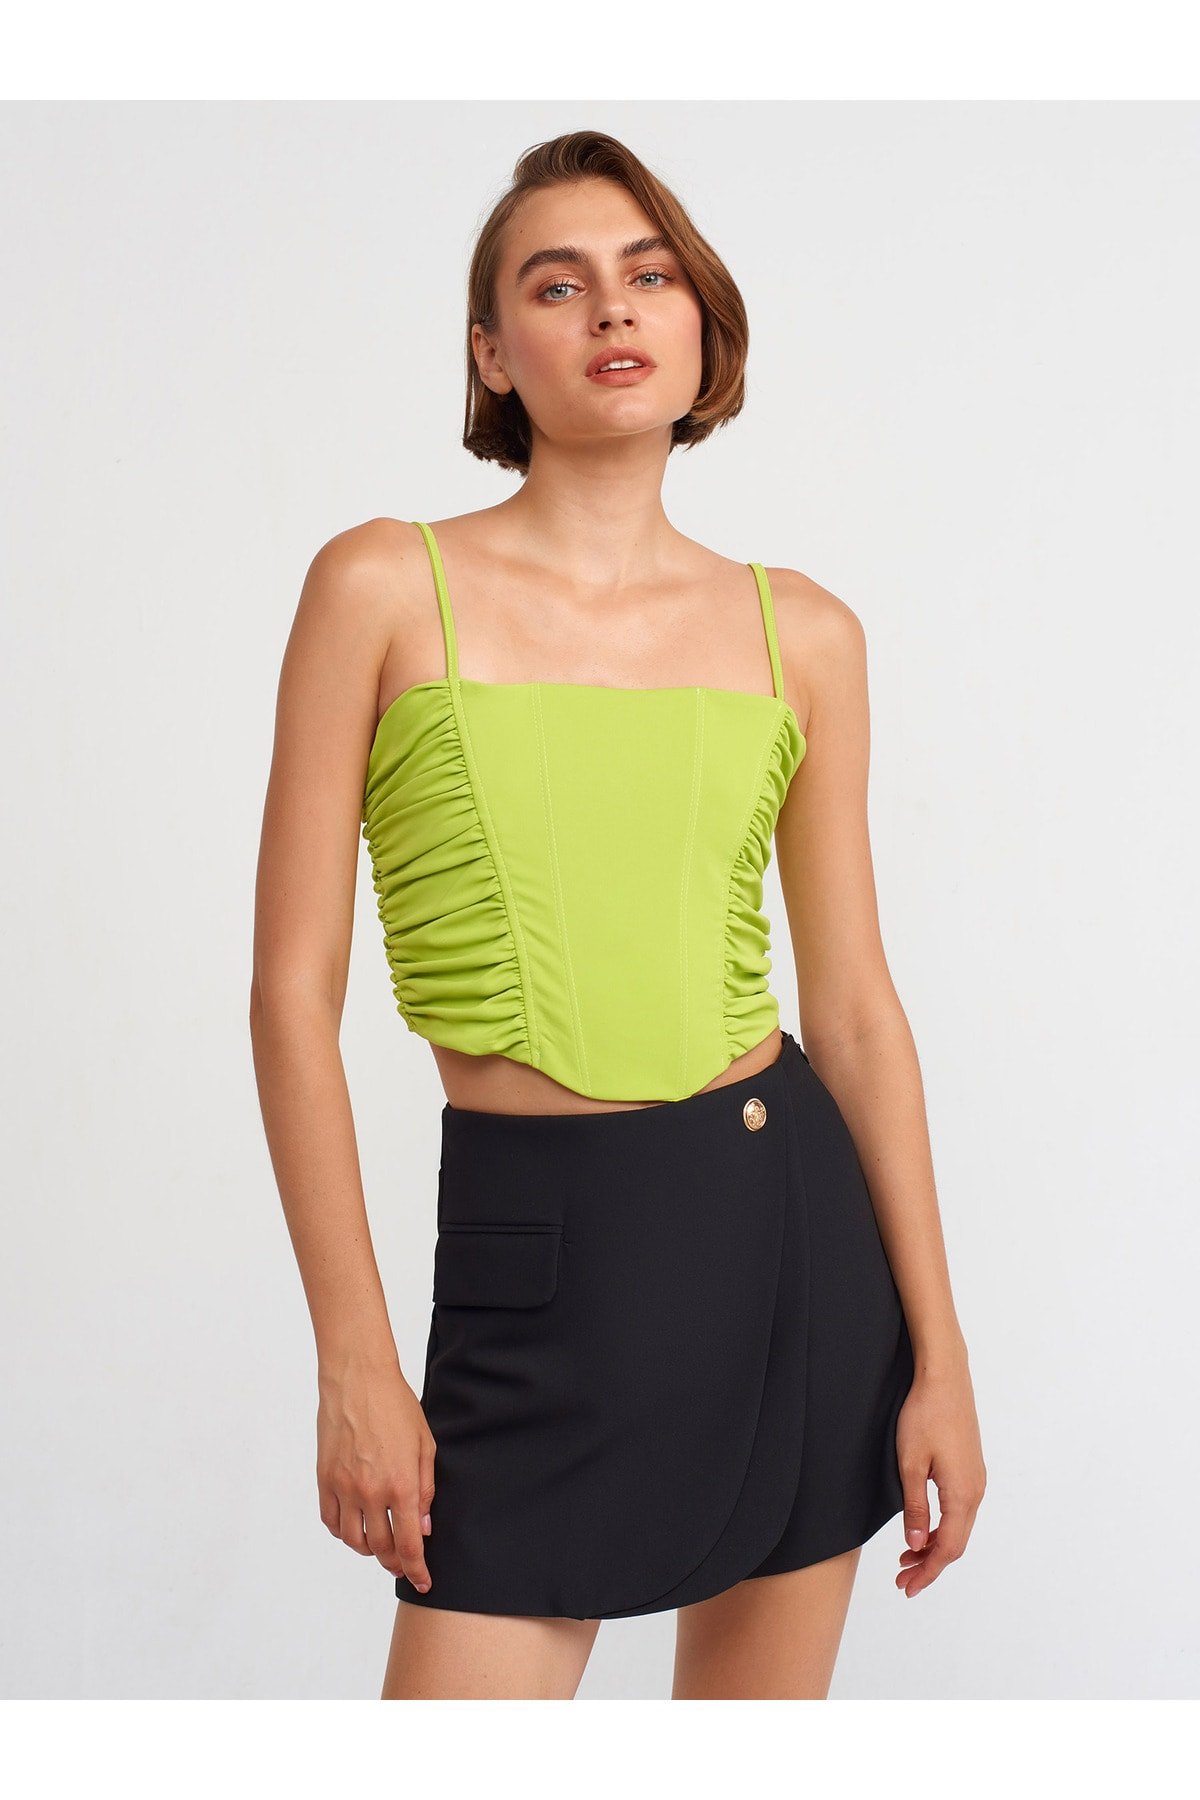 Dilvin 20129 Gathered Detailed Strap Crop Top-Lime